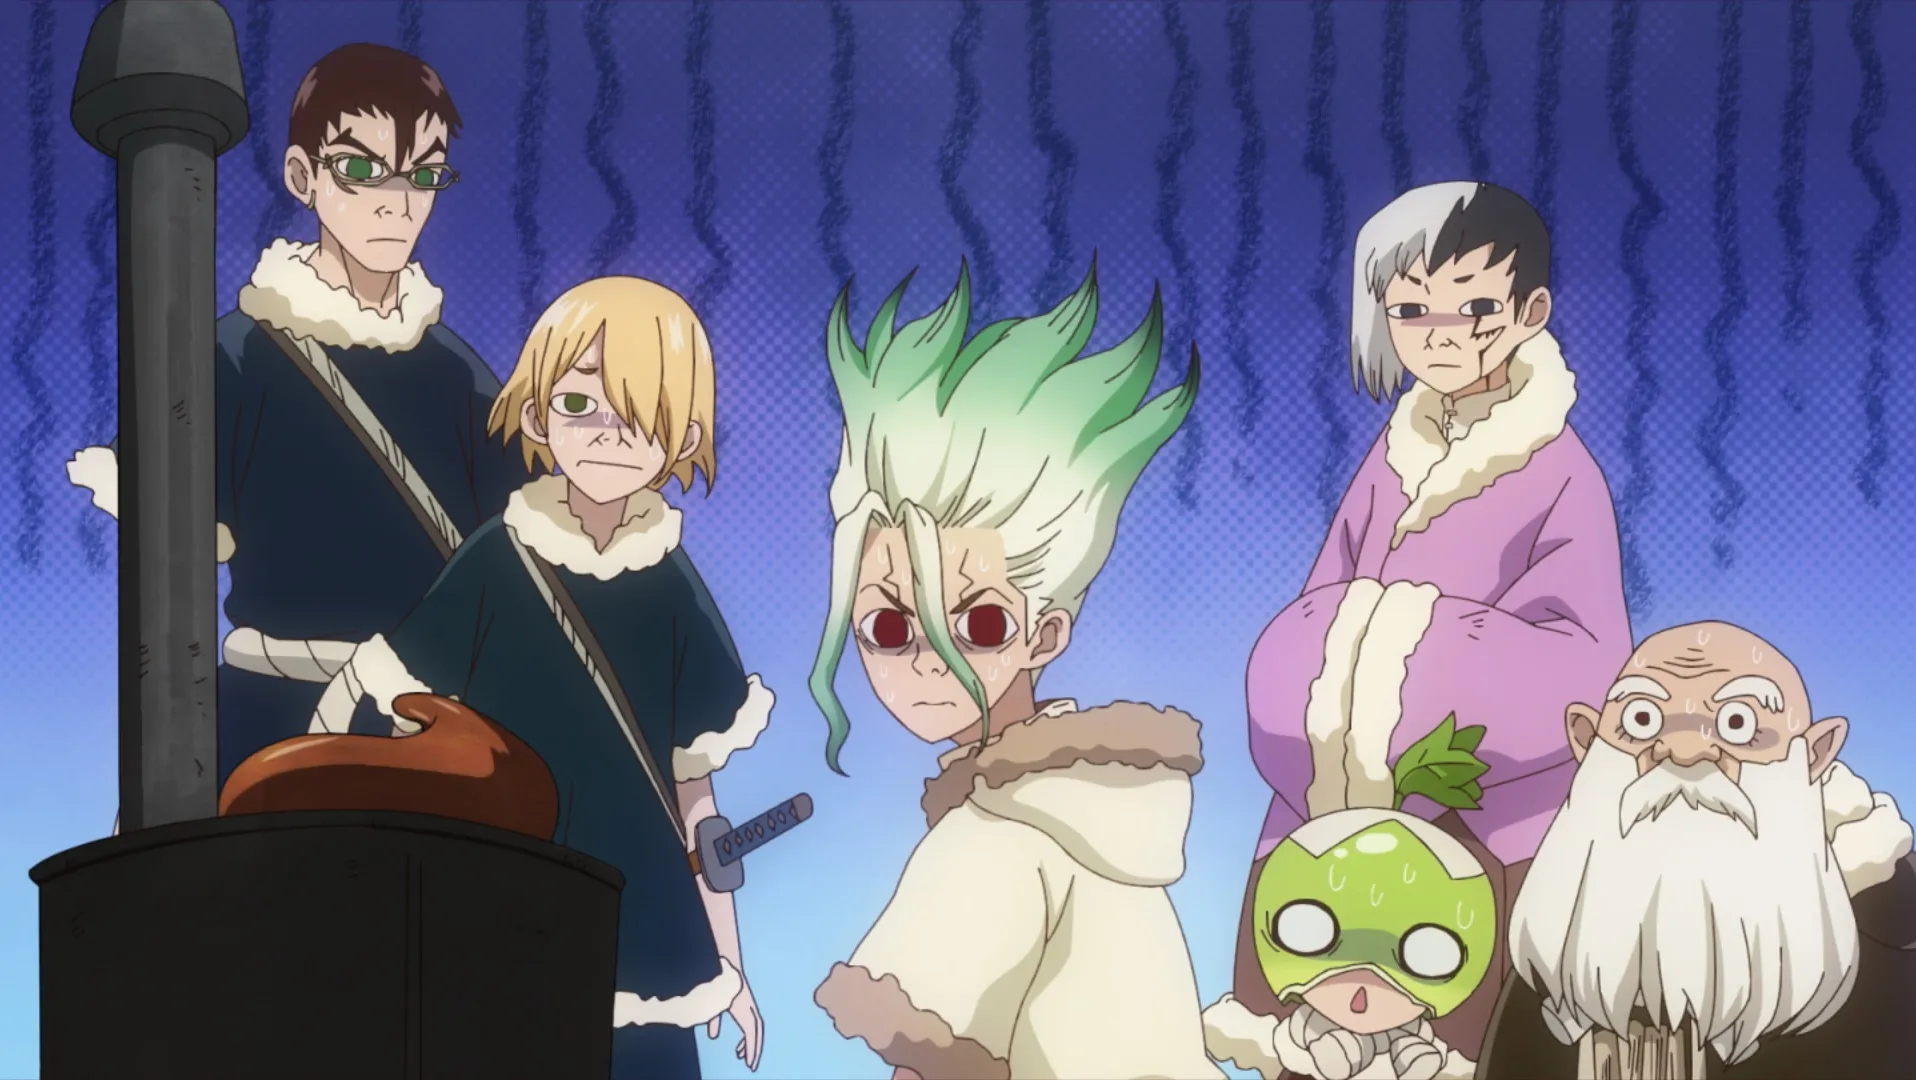 Dr. Stone season 3 part 2 release date, cast, plot and more